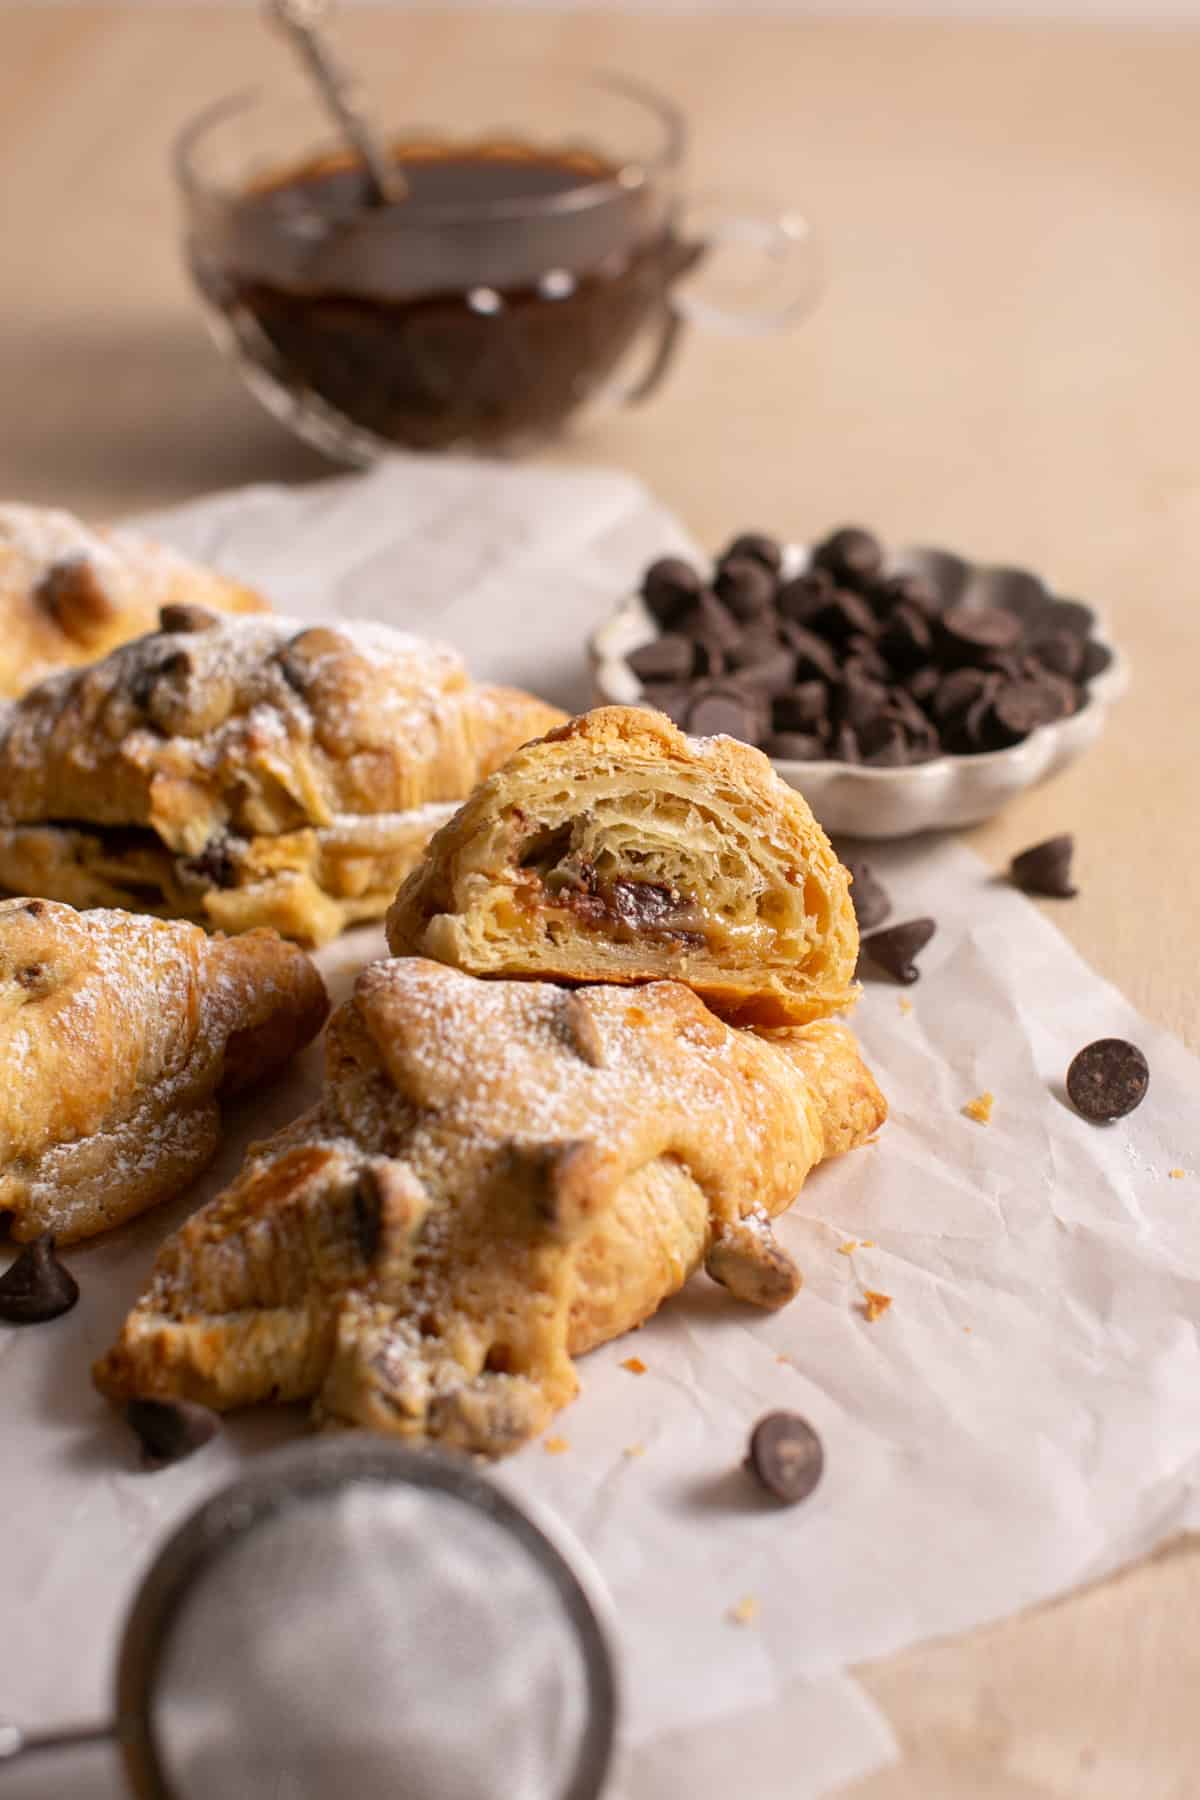 Chocolate Chip Cookie Croissant sitting by a cup of coffee.